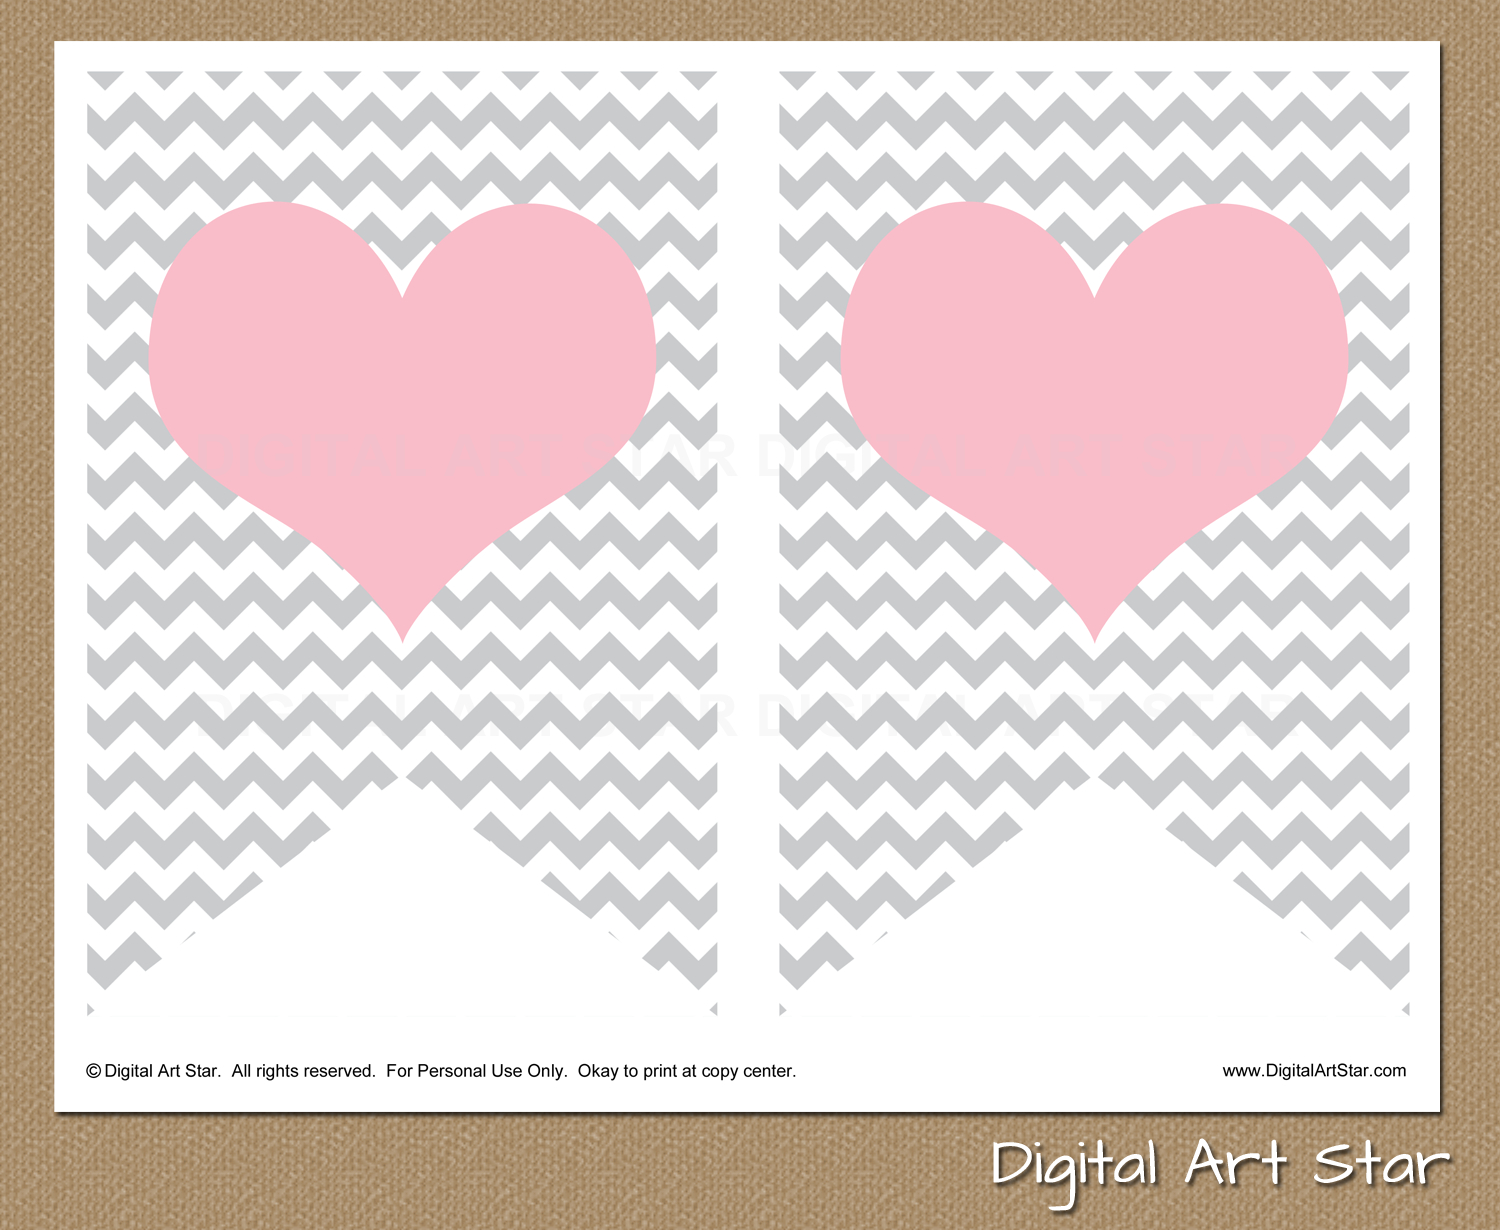 Diy Baby Shower Banner Template Free - 28 Images - Baby Pertaining To Diy Baby Shower Banner Template